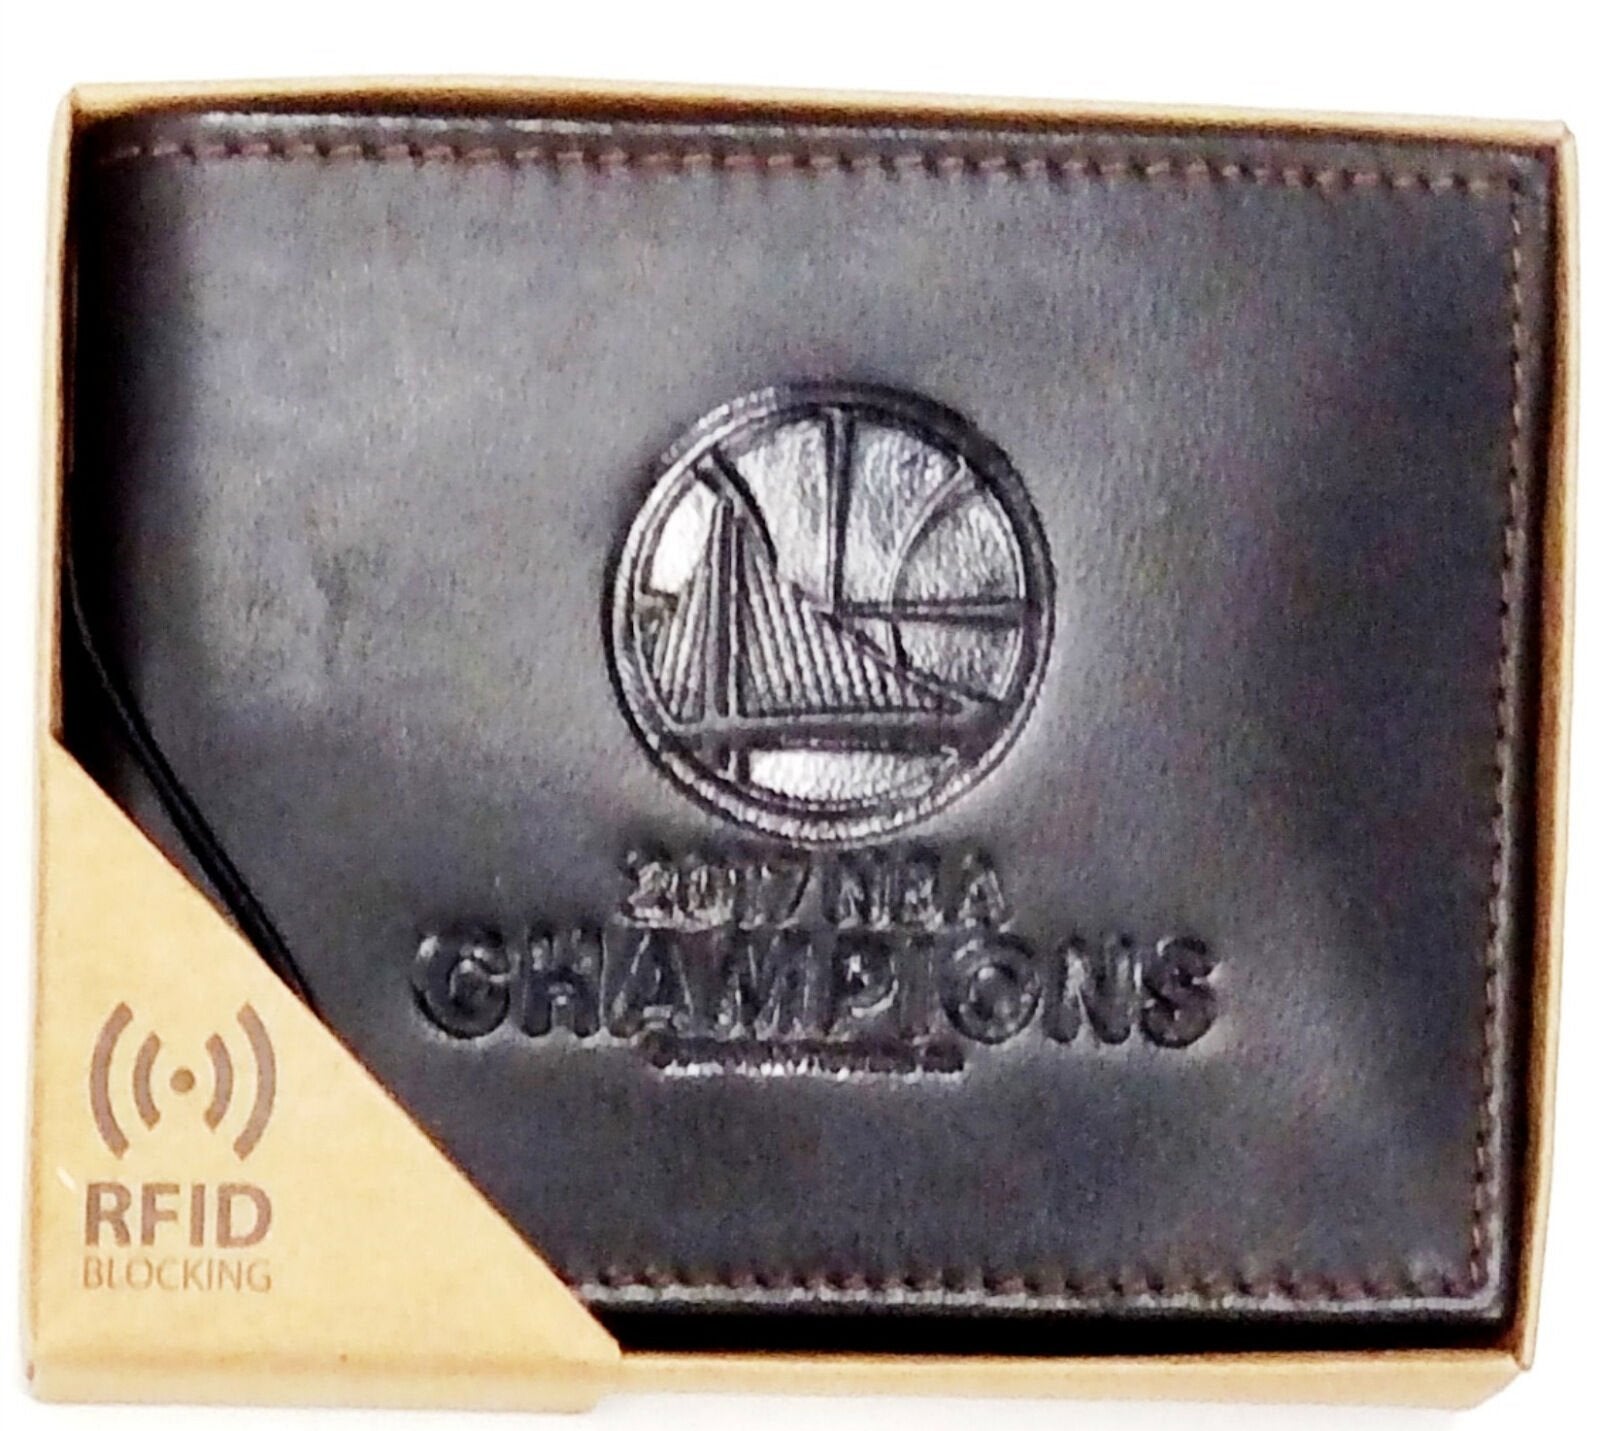 Golden State Warriors 2017 Champions Premium Brown Leather Wallet, Trifold, Embossed Laser Engraved